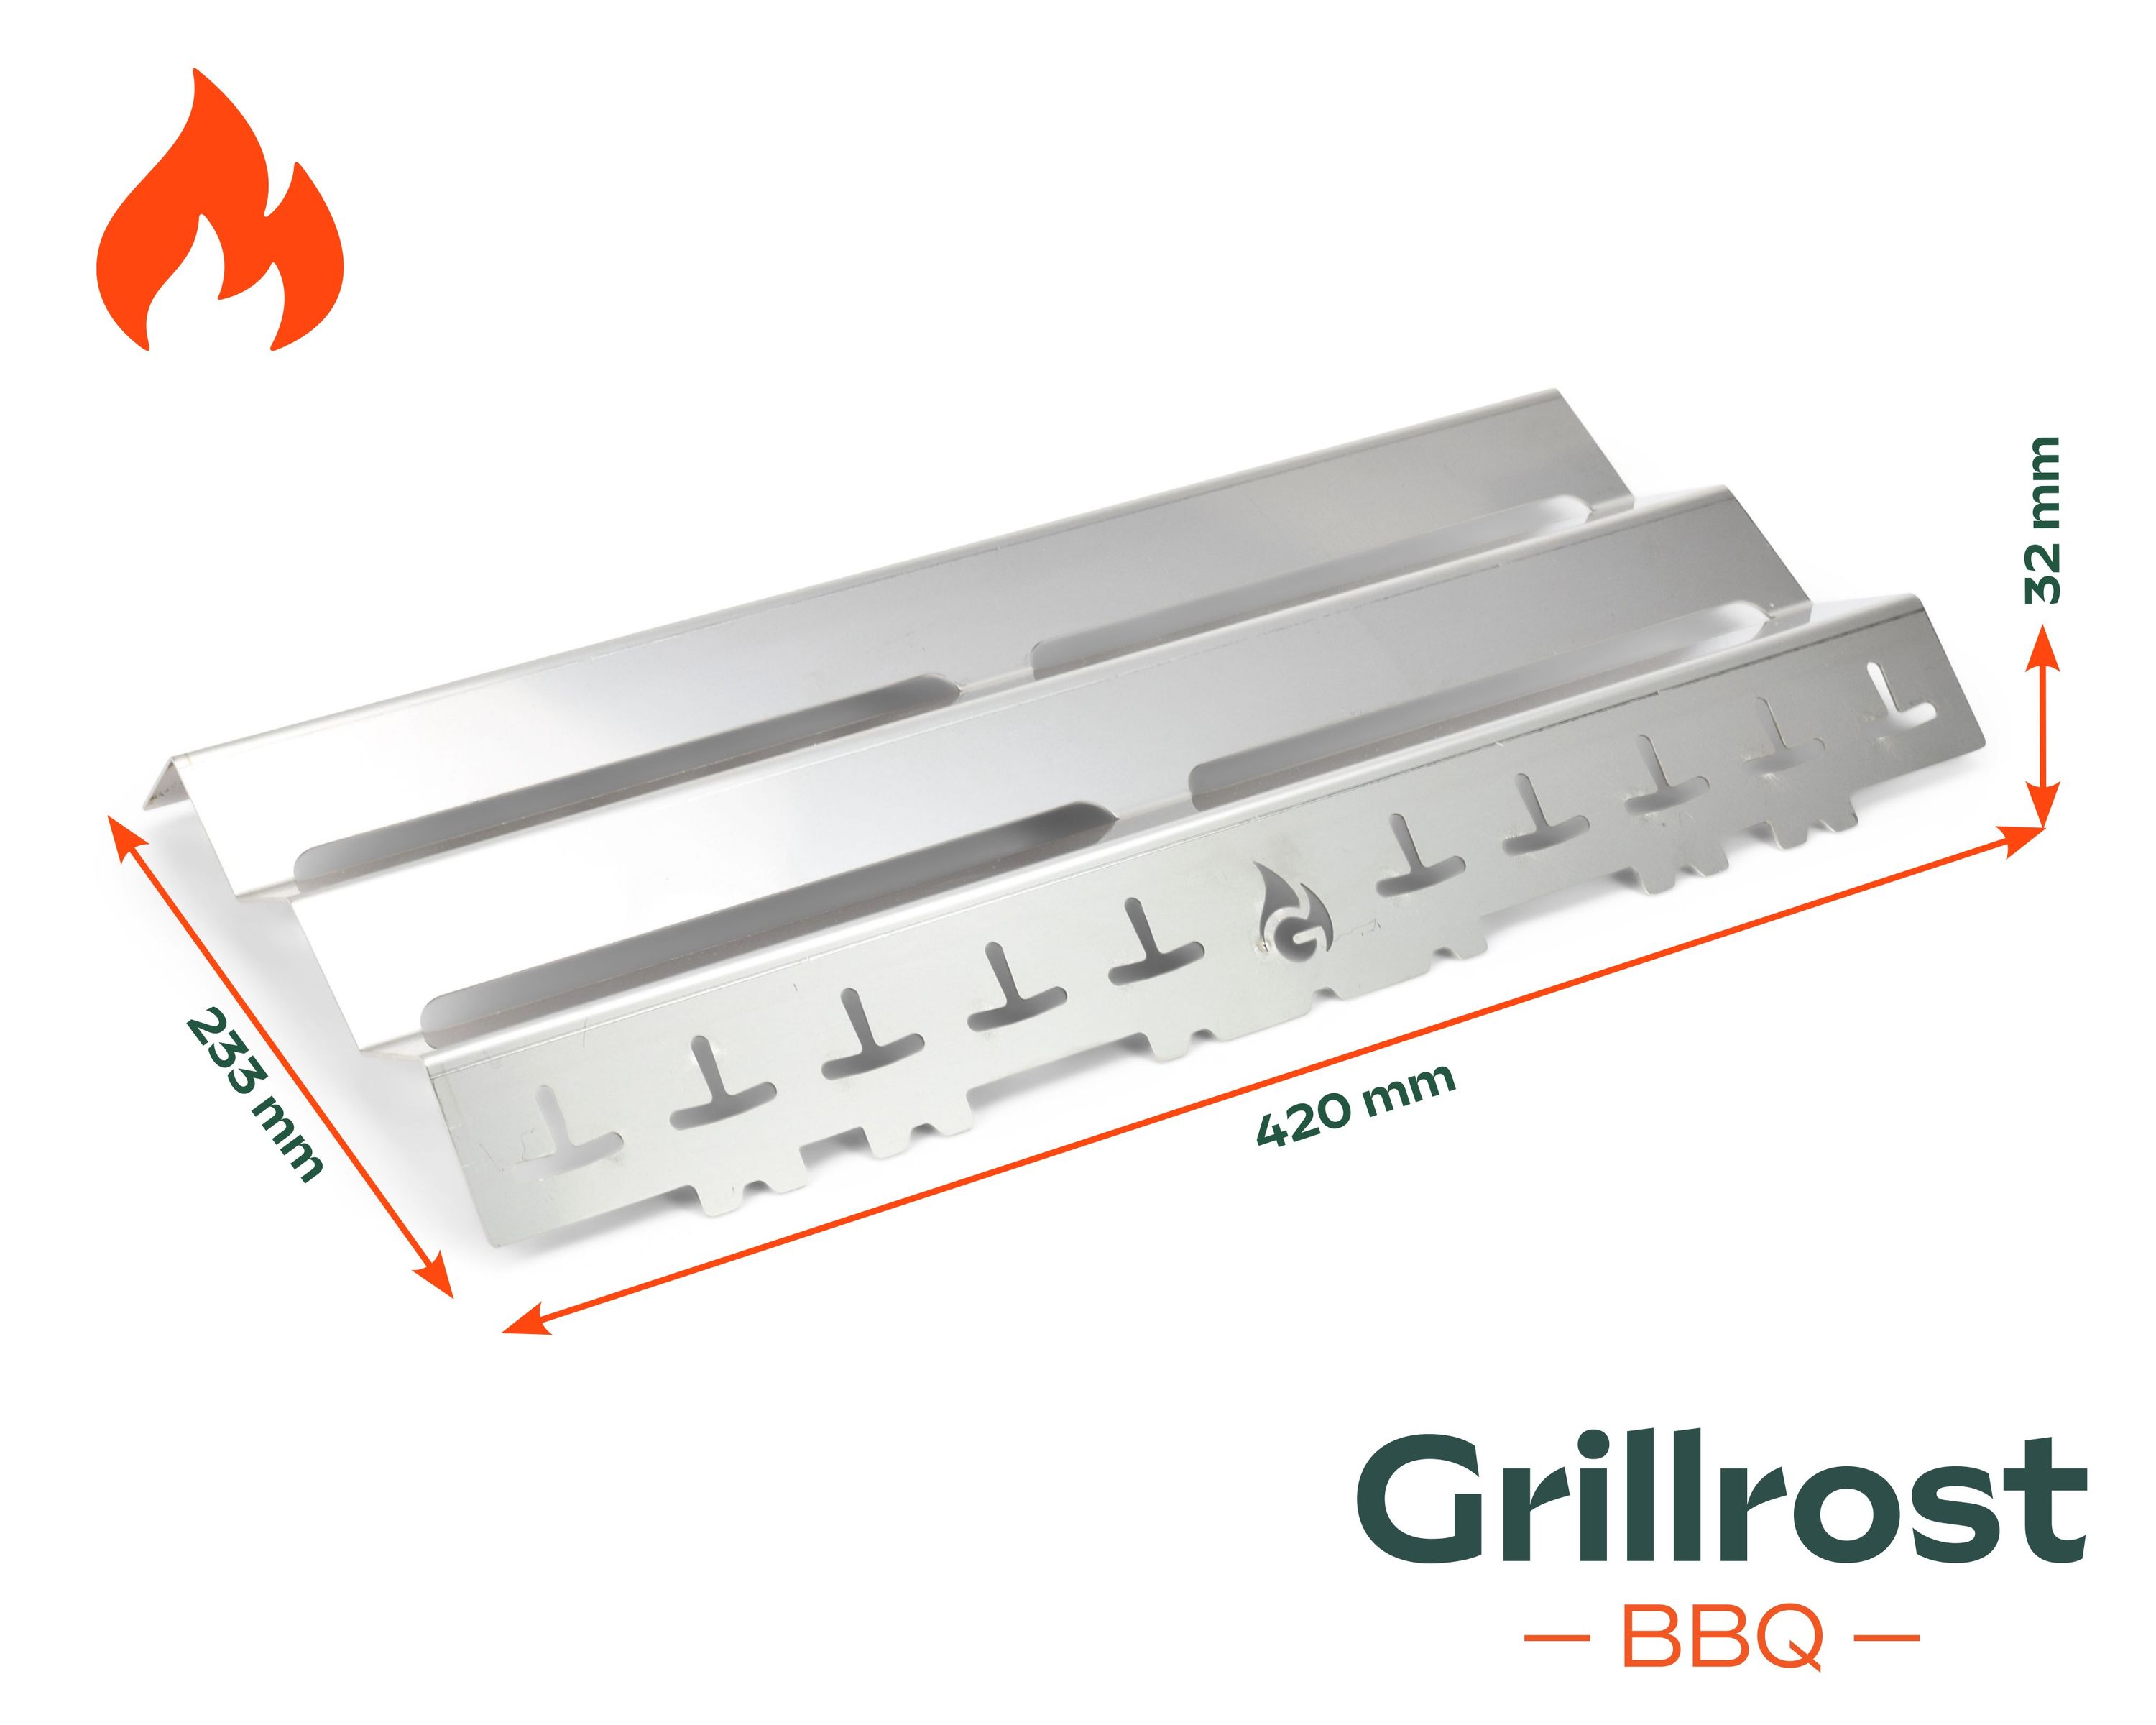 Aroma rail for Broil King Porta Chef 120 Hotter than the original "Flav-R-Wave